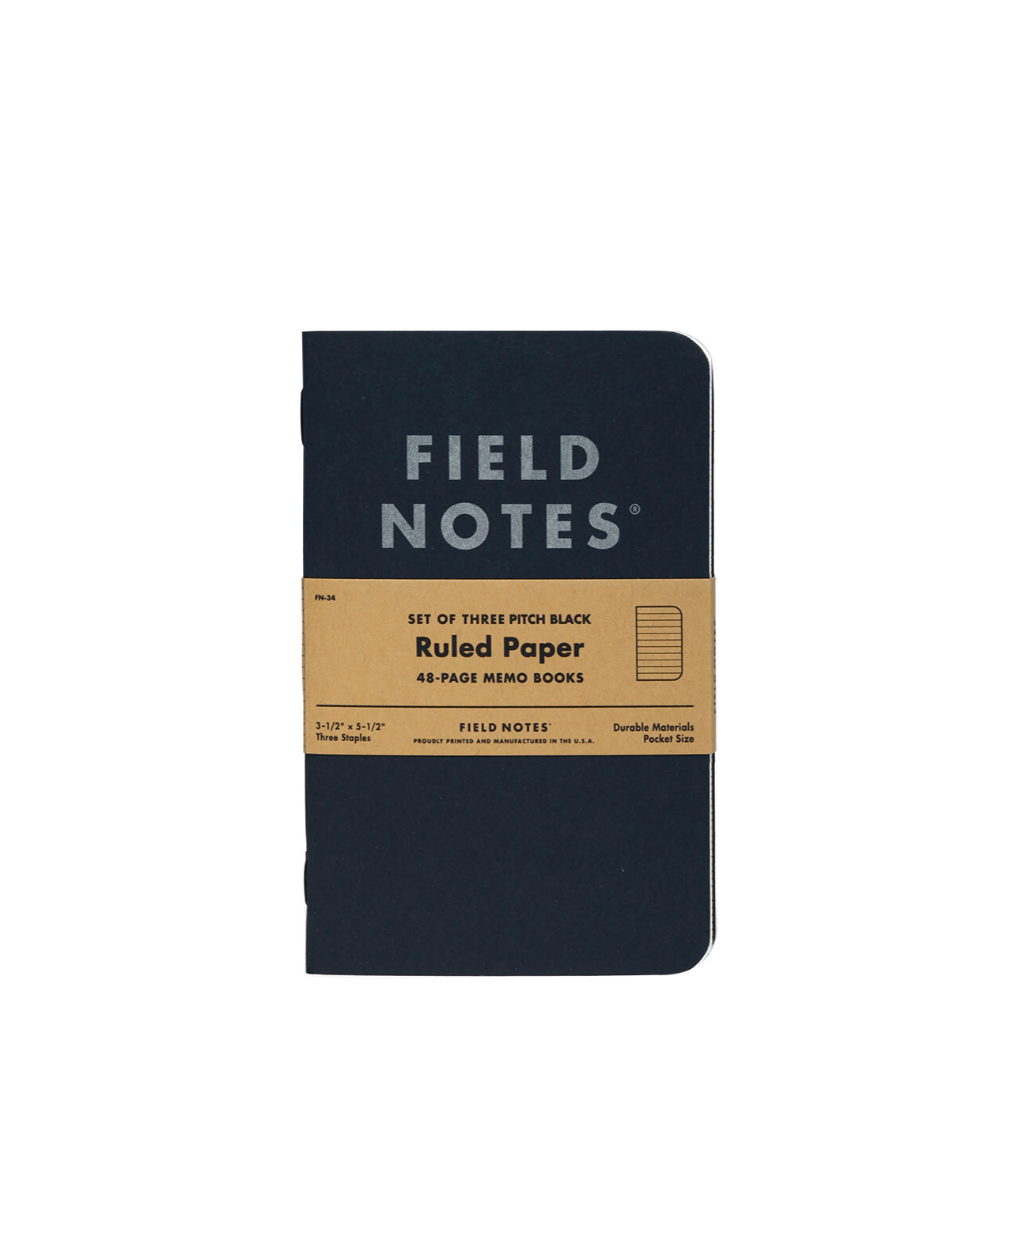 Field Notes Pitch Black Small Memo Book 3pk Ruled Paper